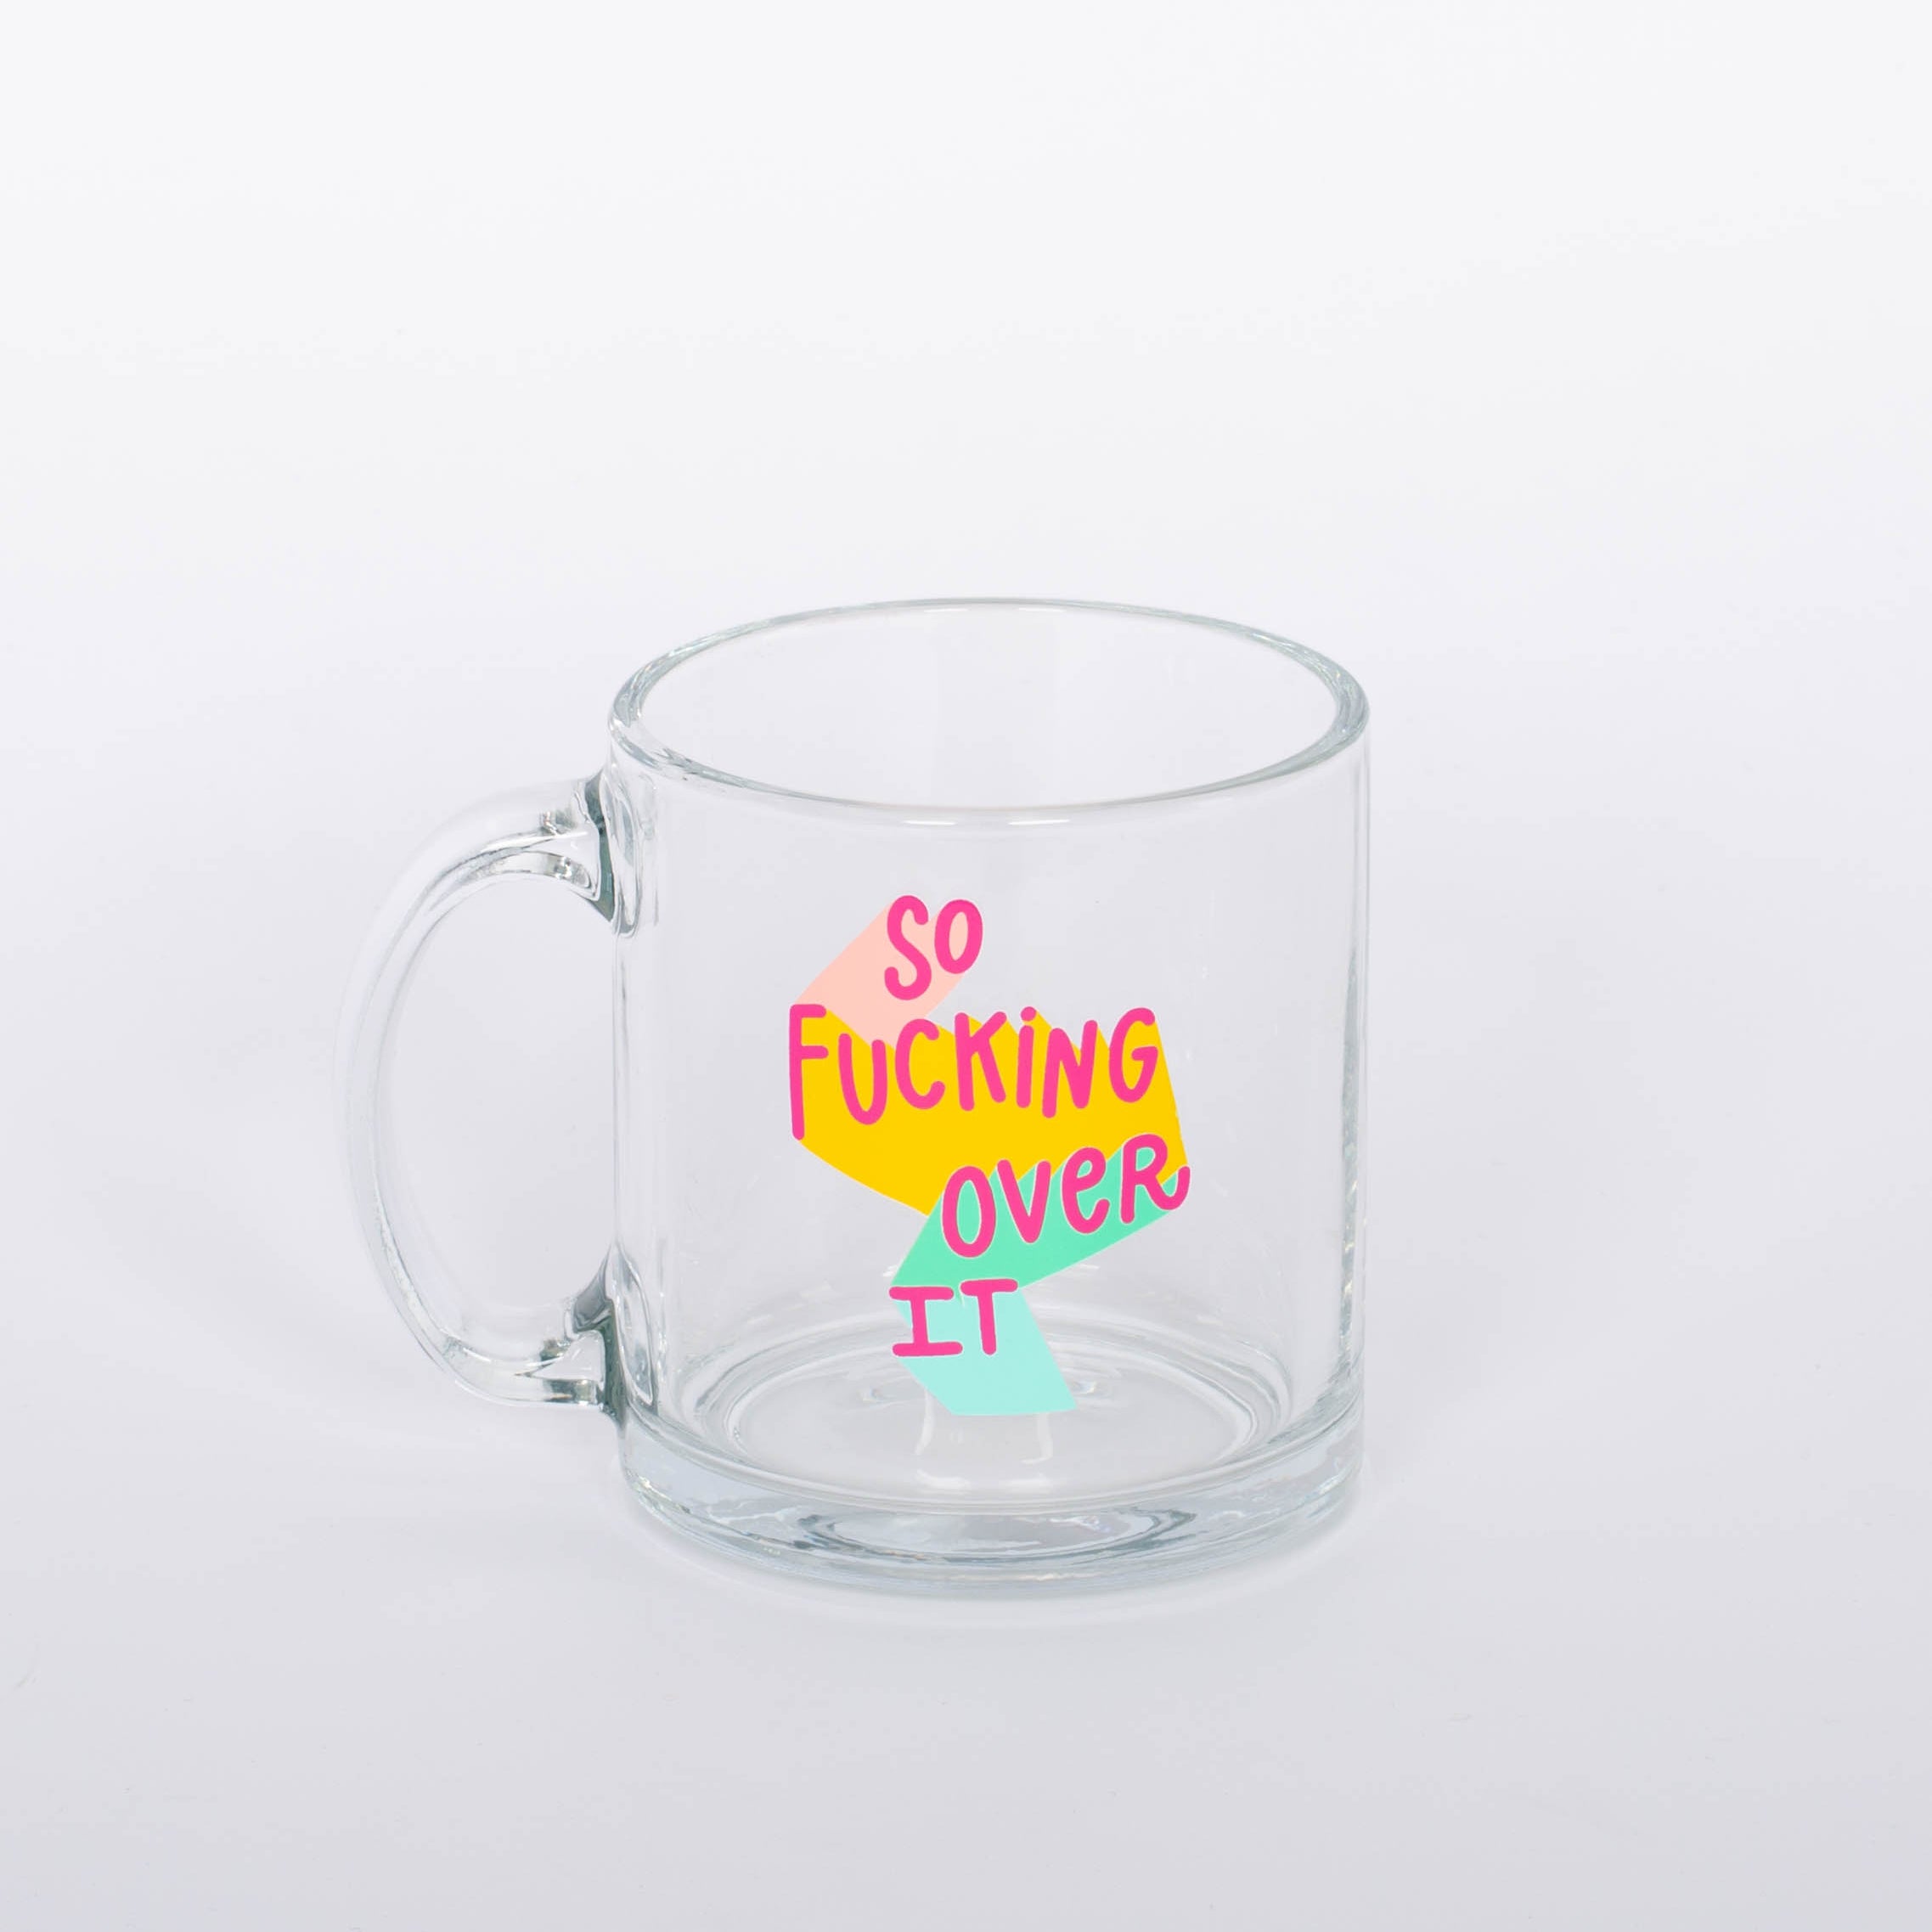 "So Fucking Over It" glass mug. Coffee, tea, hot chocolate, whatever beverage you love, our mug will keep them nice and warm for you. Plus, you'll look super cute drinking out of it.